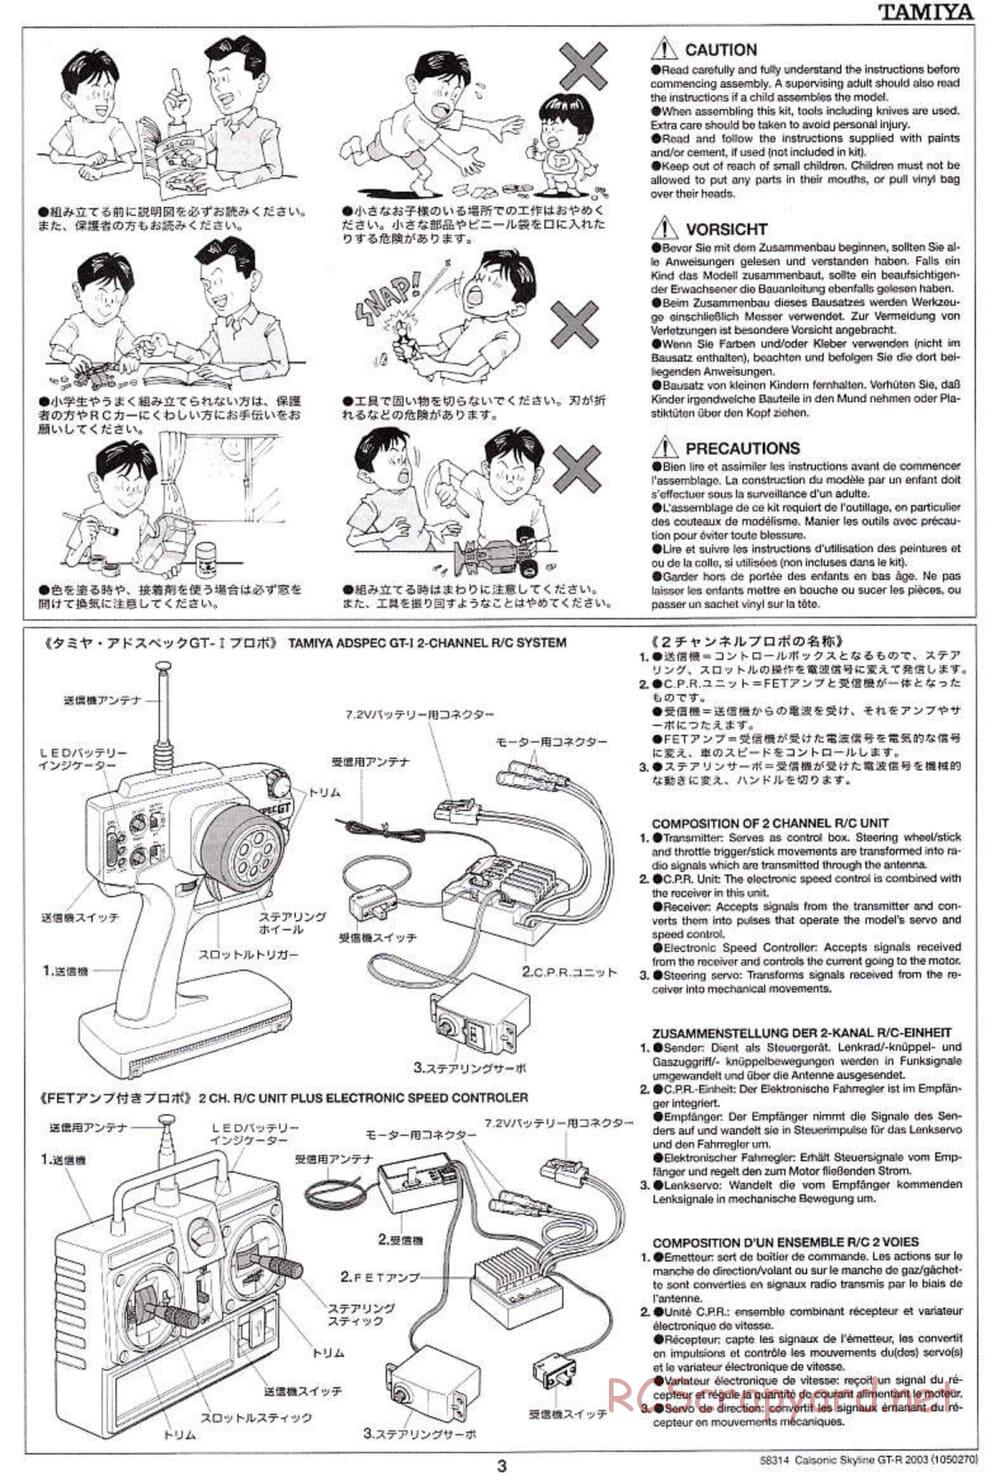 Tamiya - Calsonic Skyline GT-R 2003 - TT-01 Chassis - Manual - Page 3